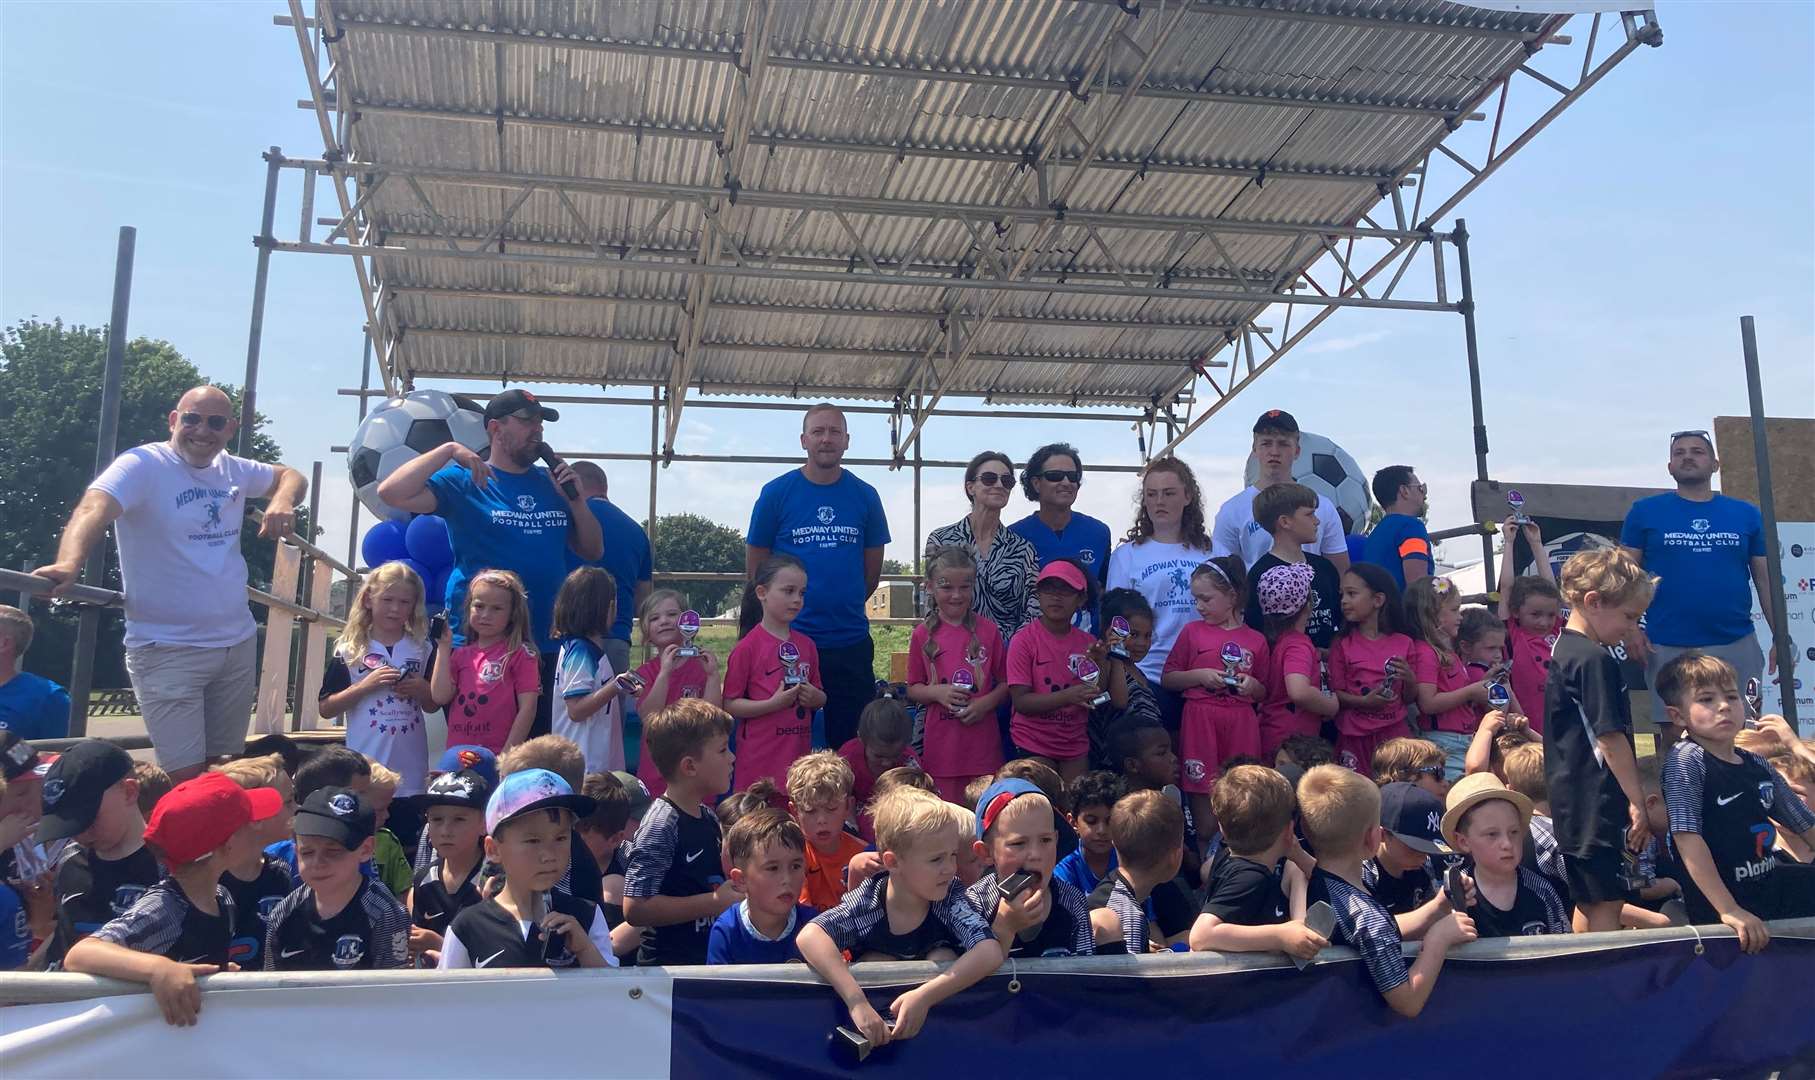 Medway United’s soccer school kids with their 2022/23 club awards, presented by Brad and Shannon Galinson